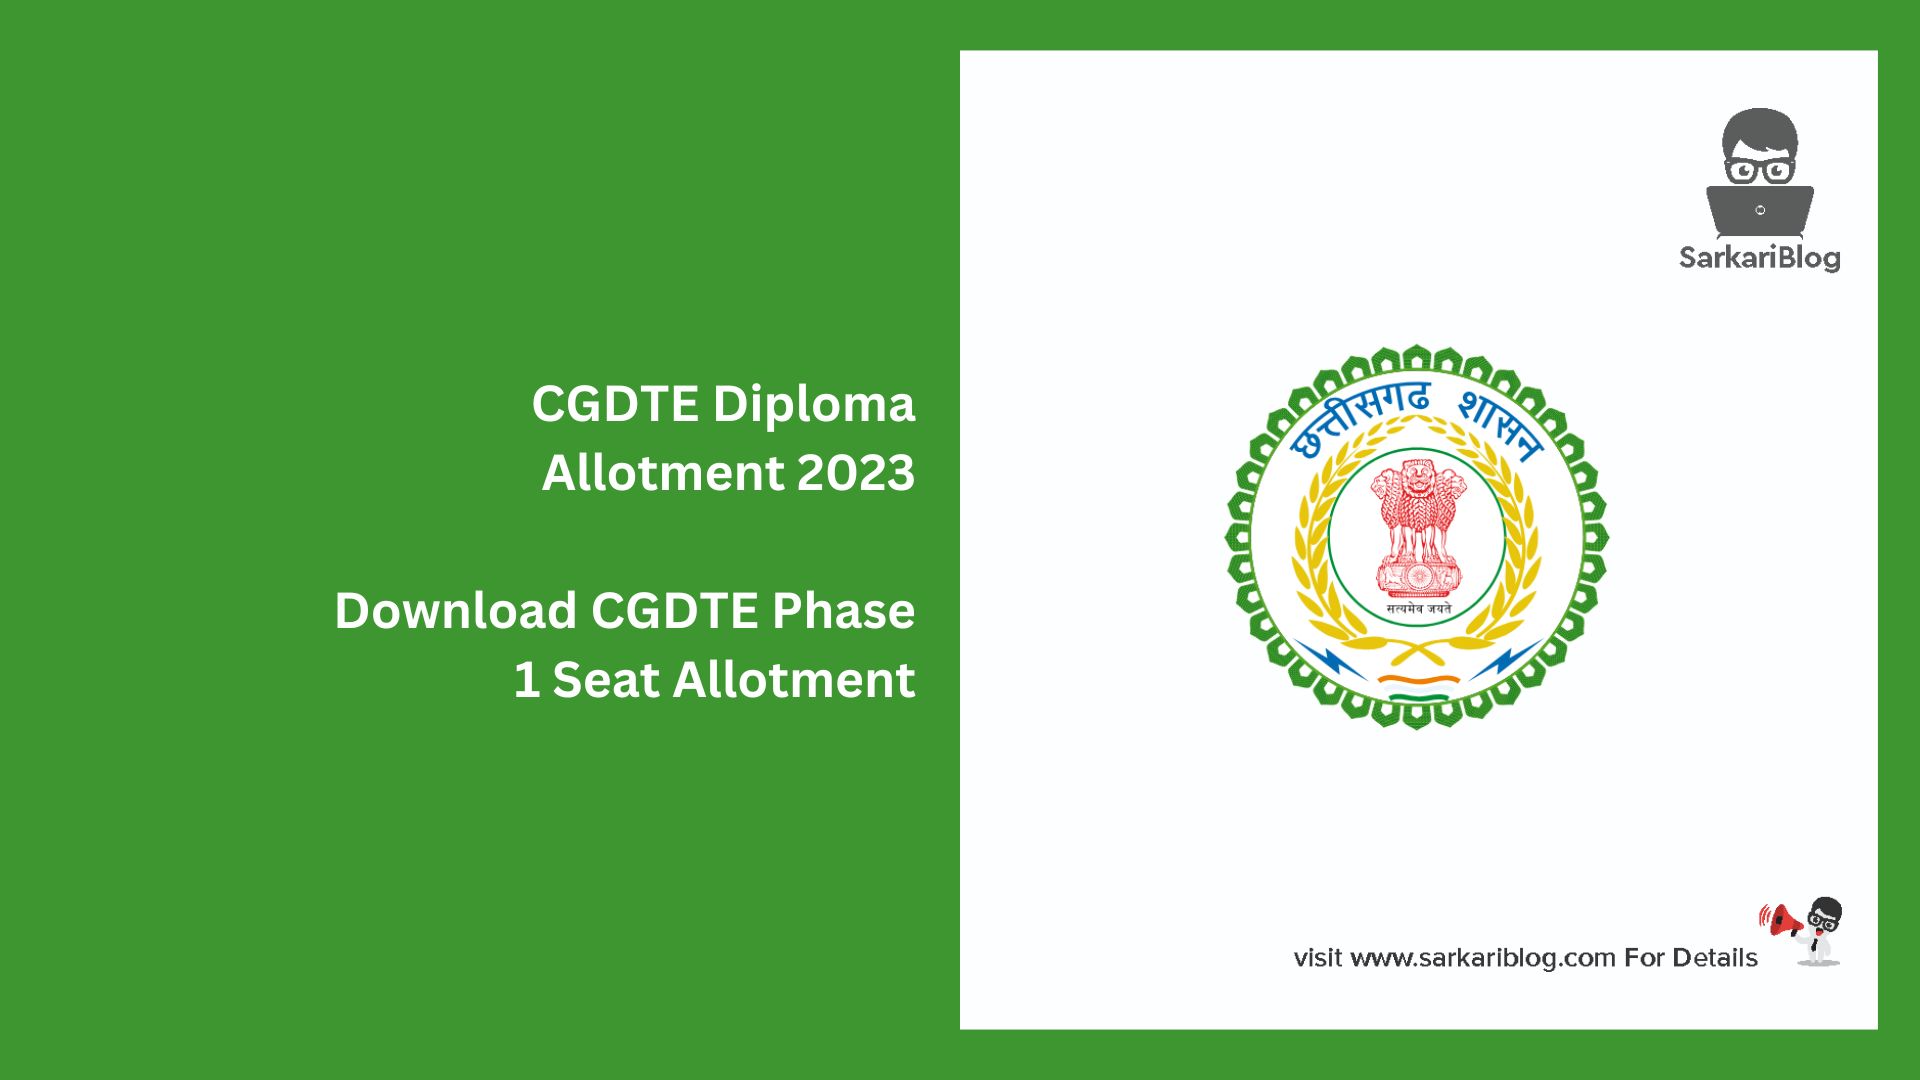 CGDTE Diploma Allotment 2023